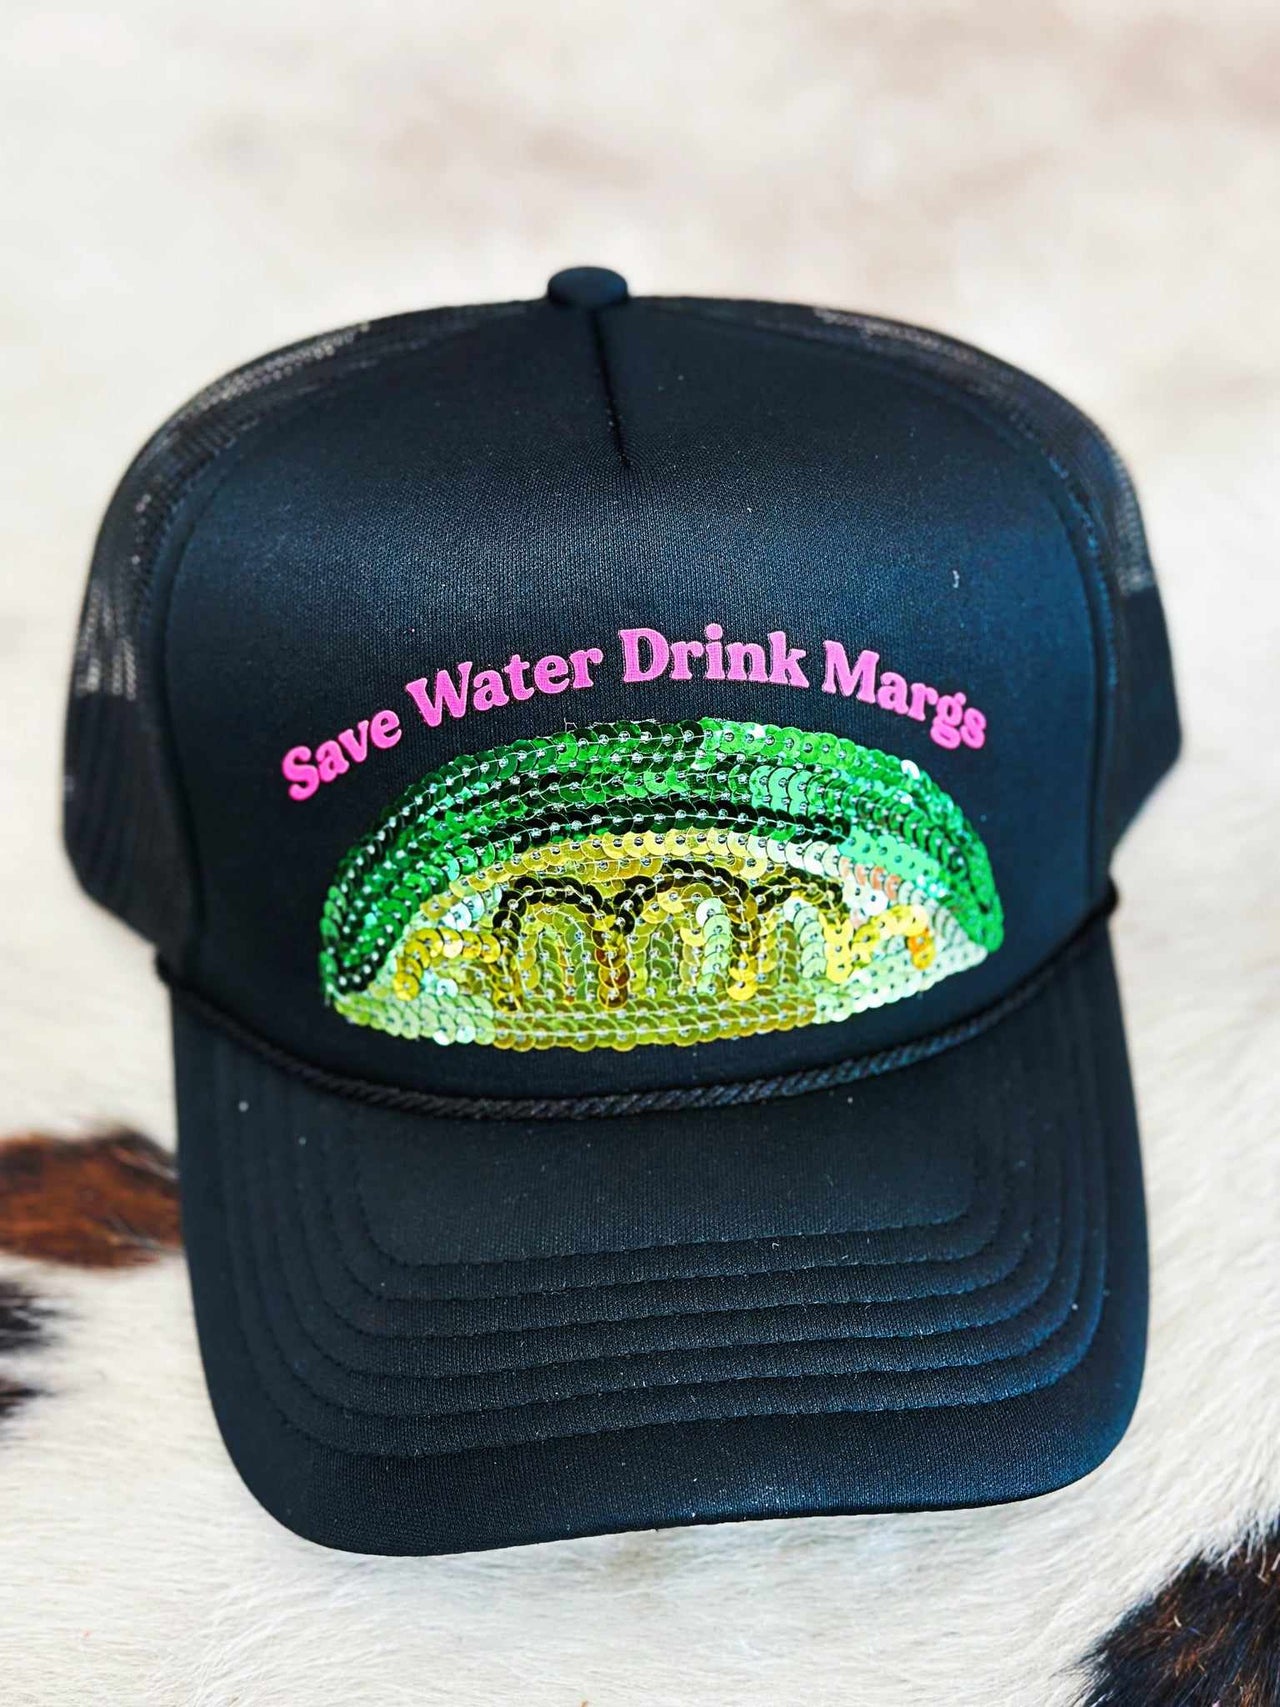 Save Water Drink Margs Sequin Lime Trucker Hat - Black Pink